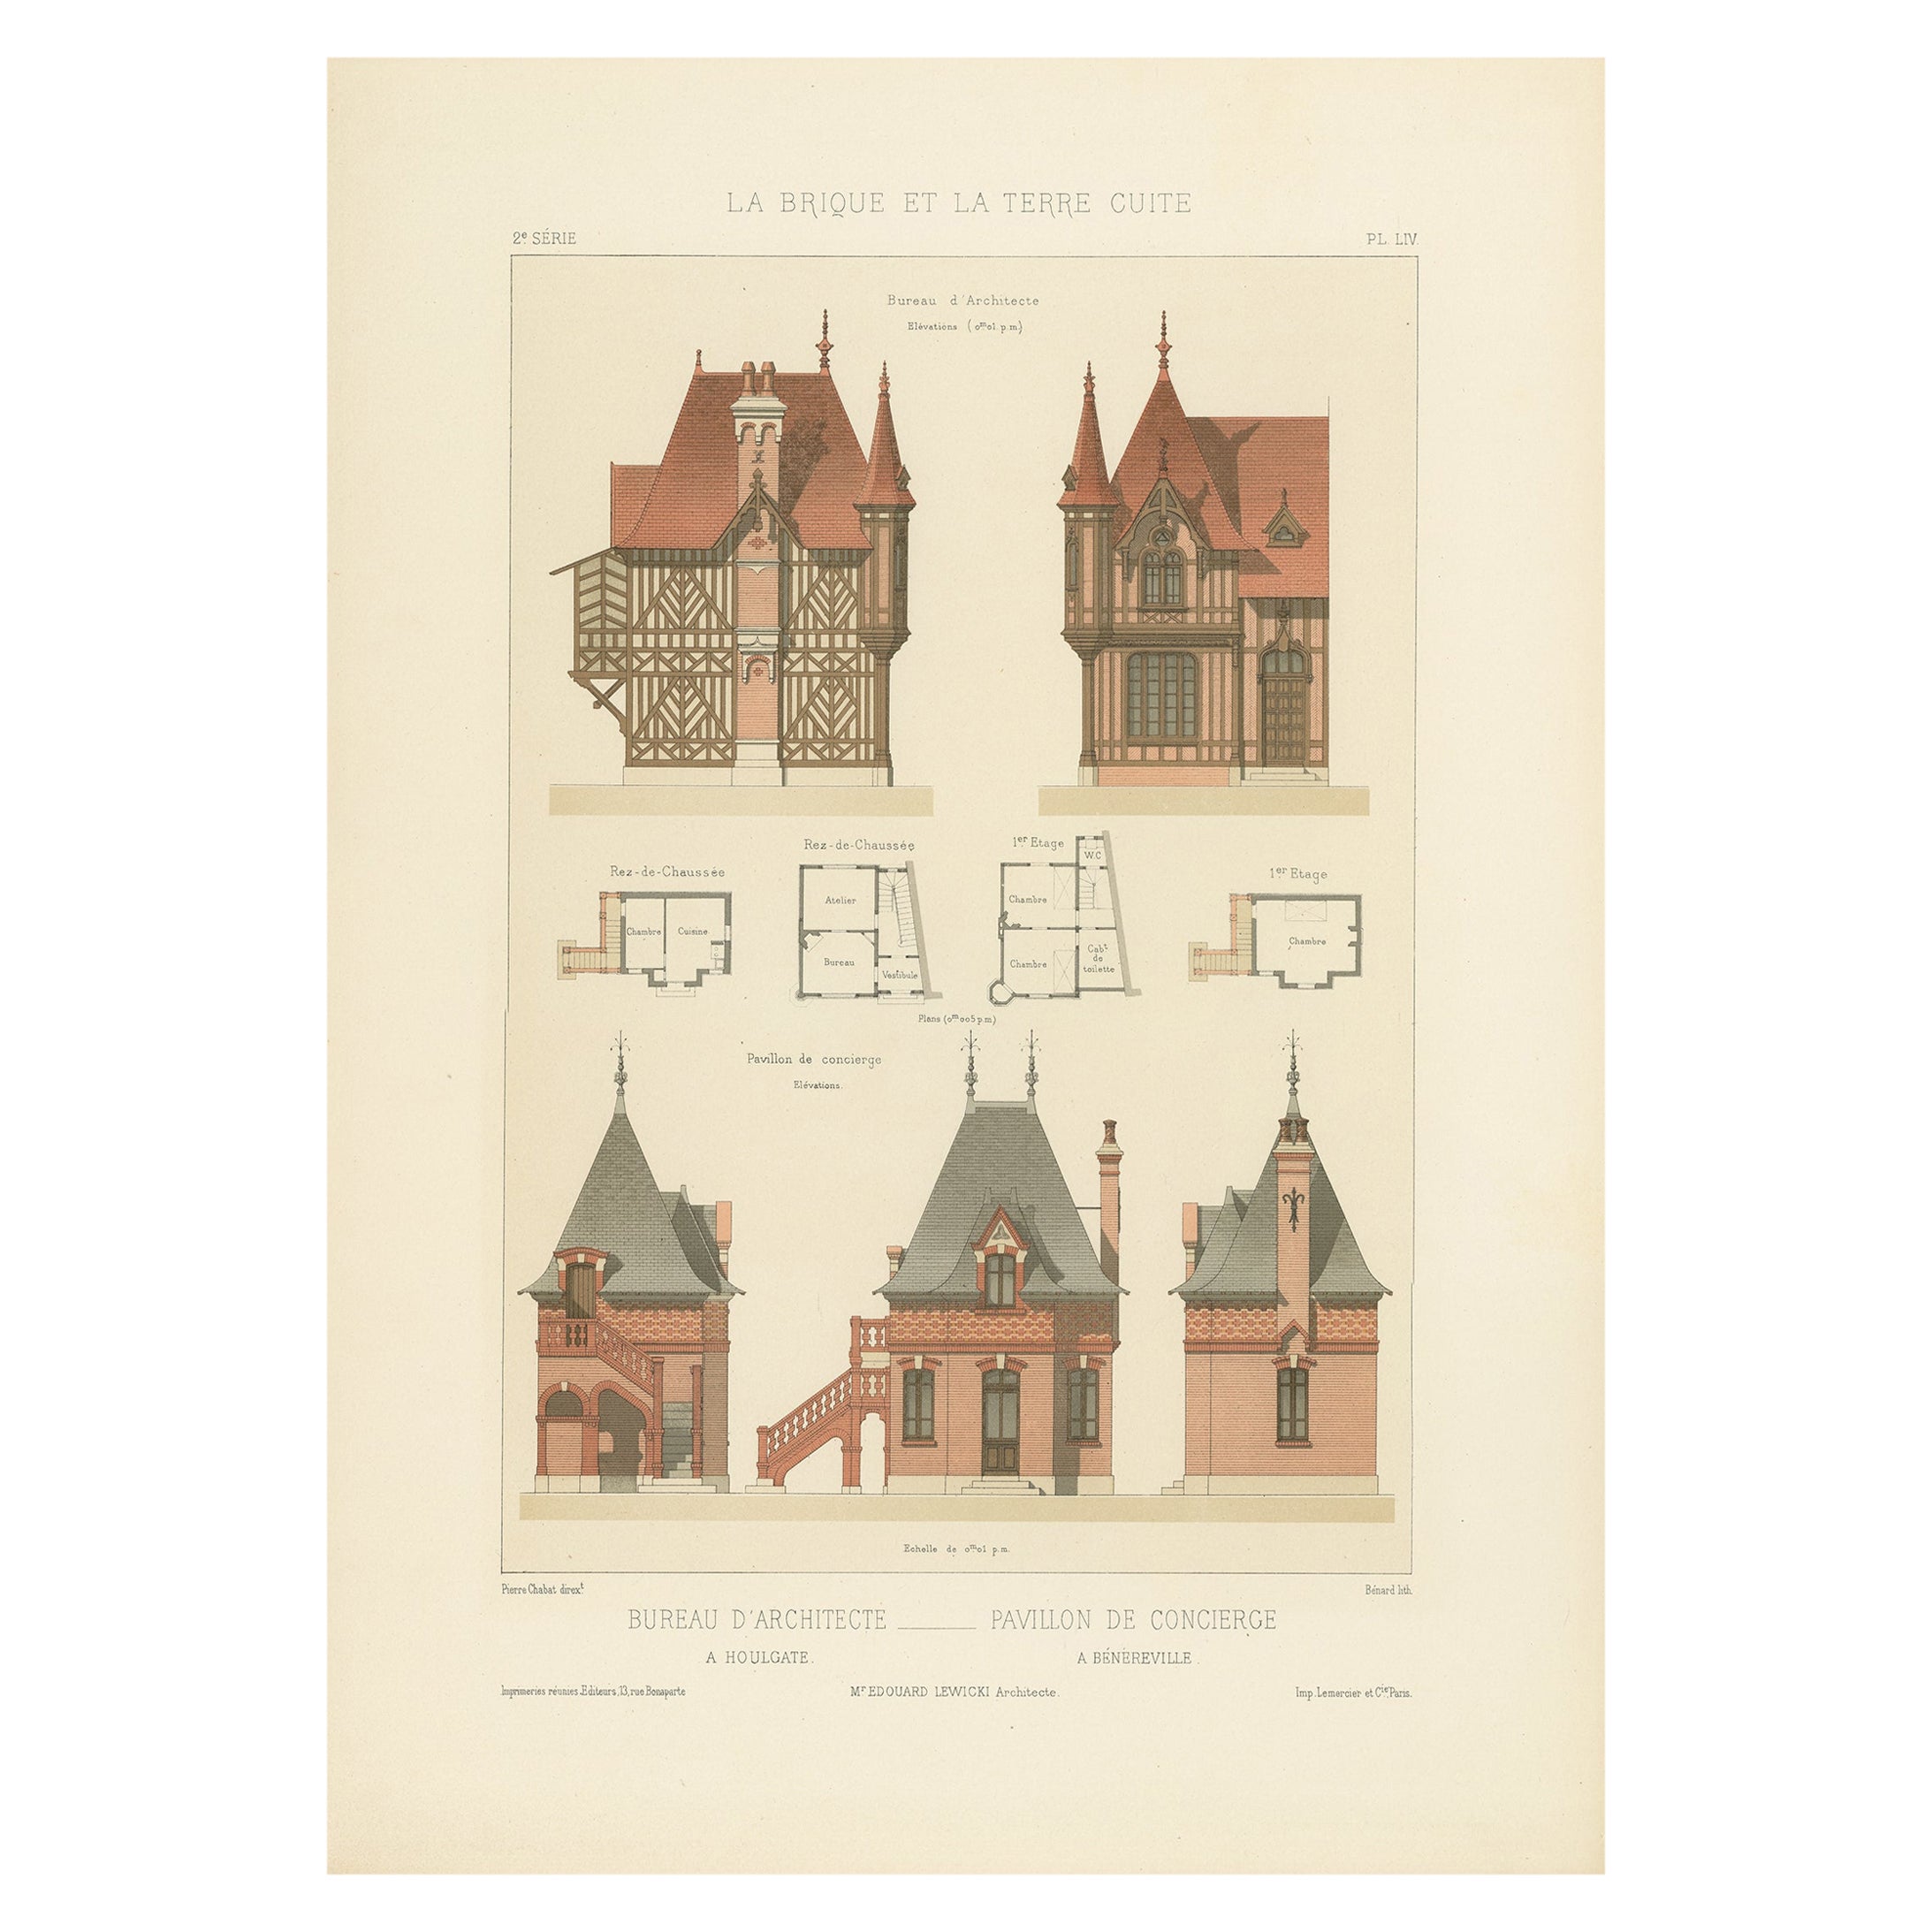 Architectural Building Design Print of Ecuries in France, Chabat, c.1900  For Sale at 1stDibs